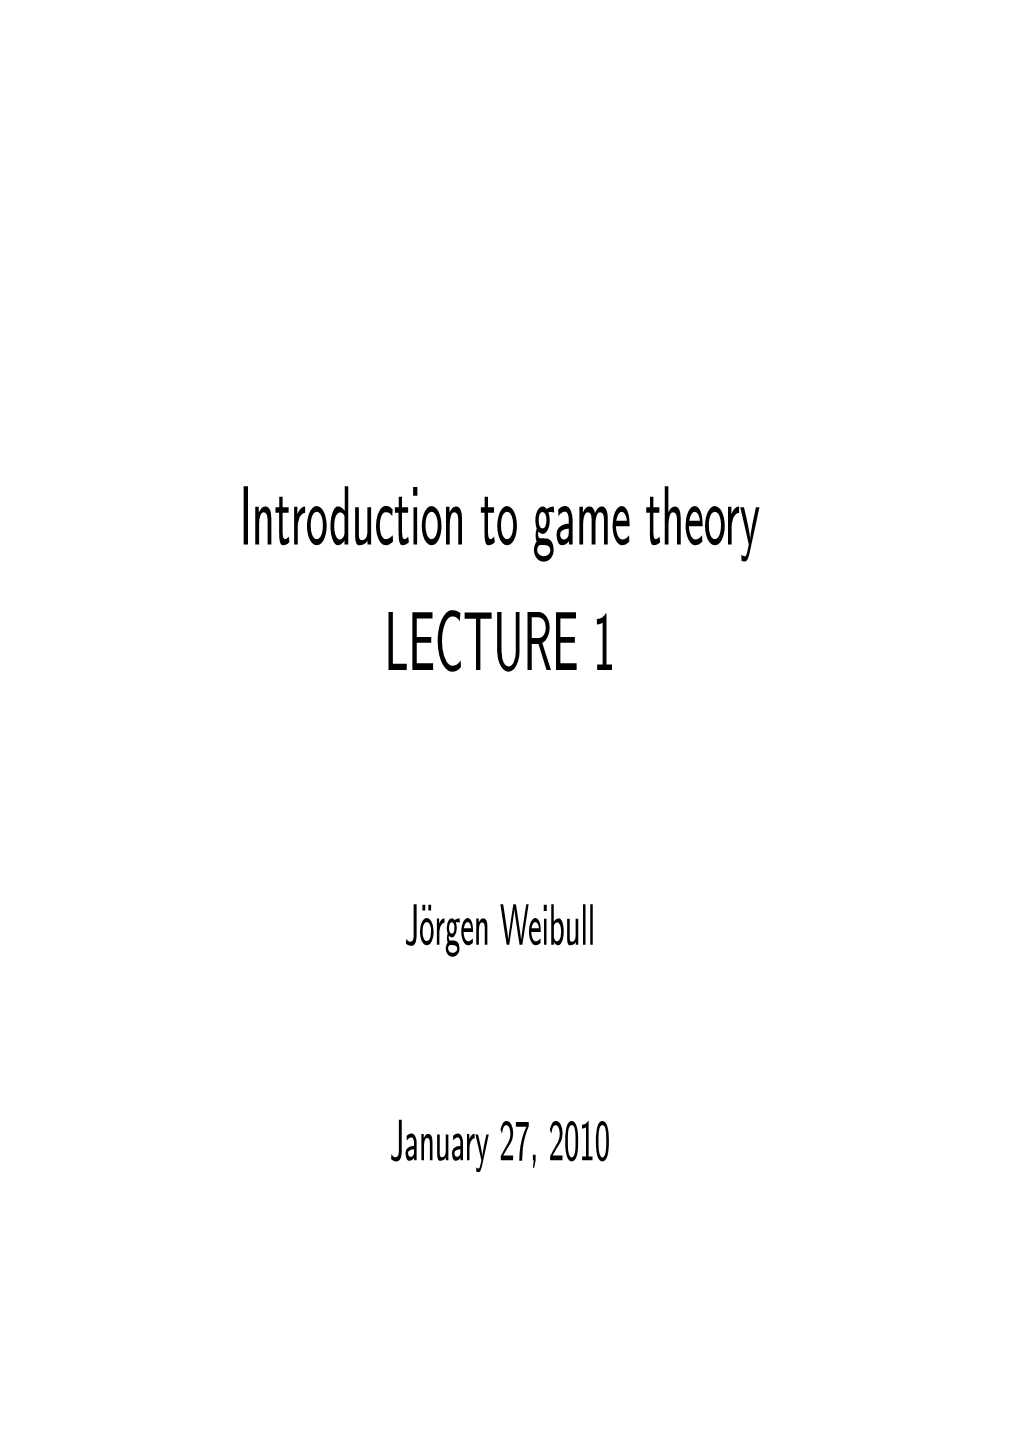 Introduction to Game Theory LECTURE 1